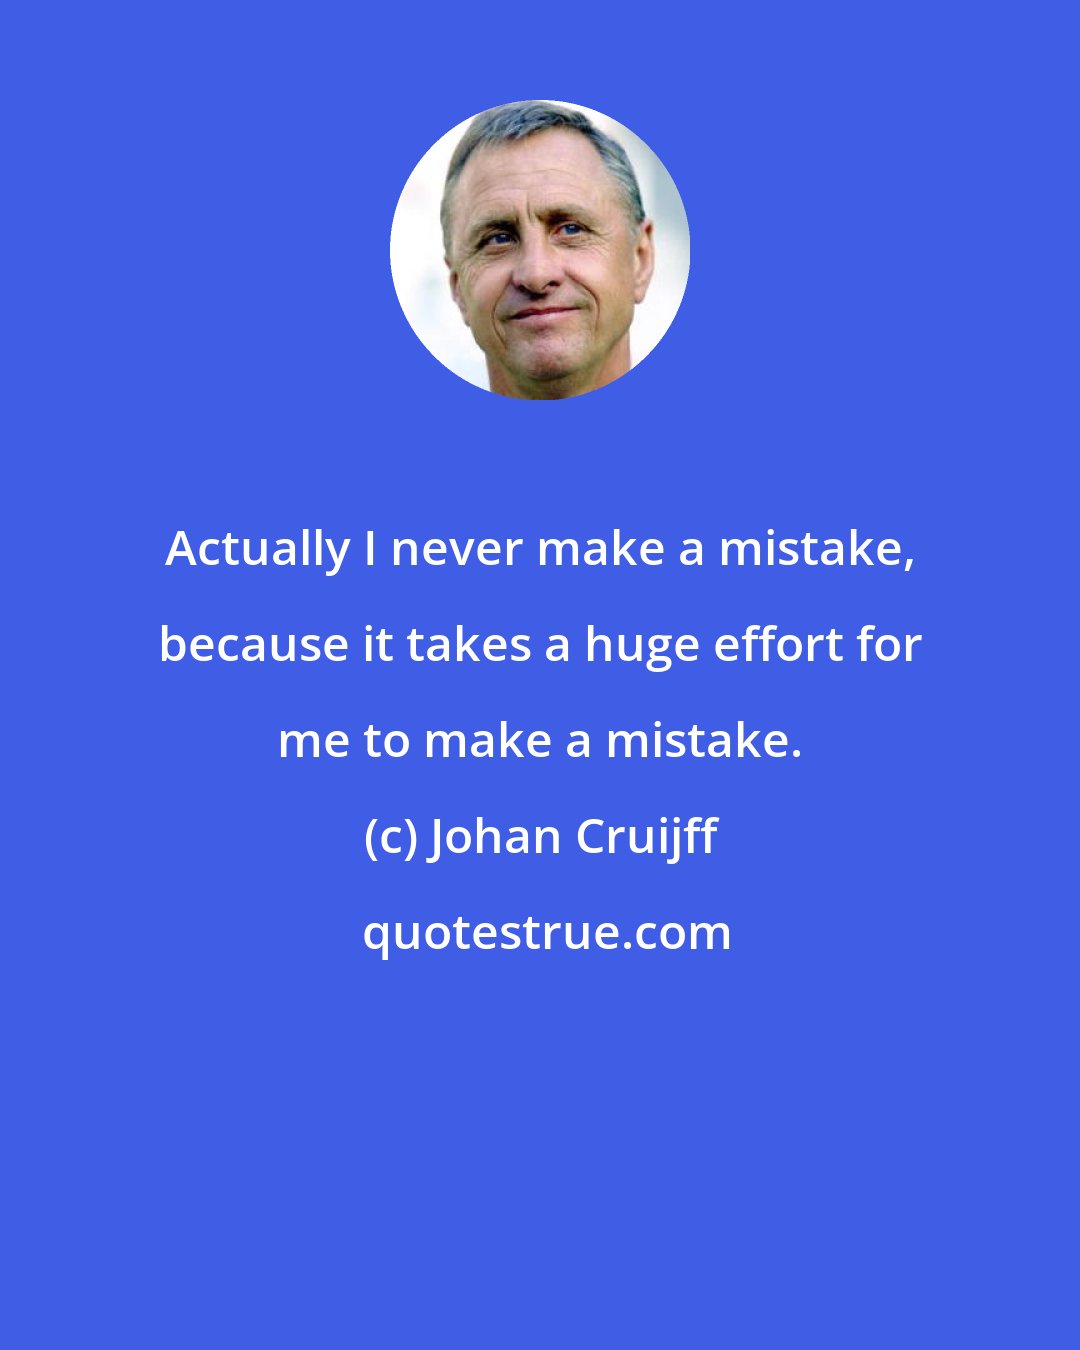 Johan Cruijff: Actually I never make a mistake, because it takes a huge effort for me to make a mistake.